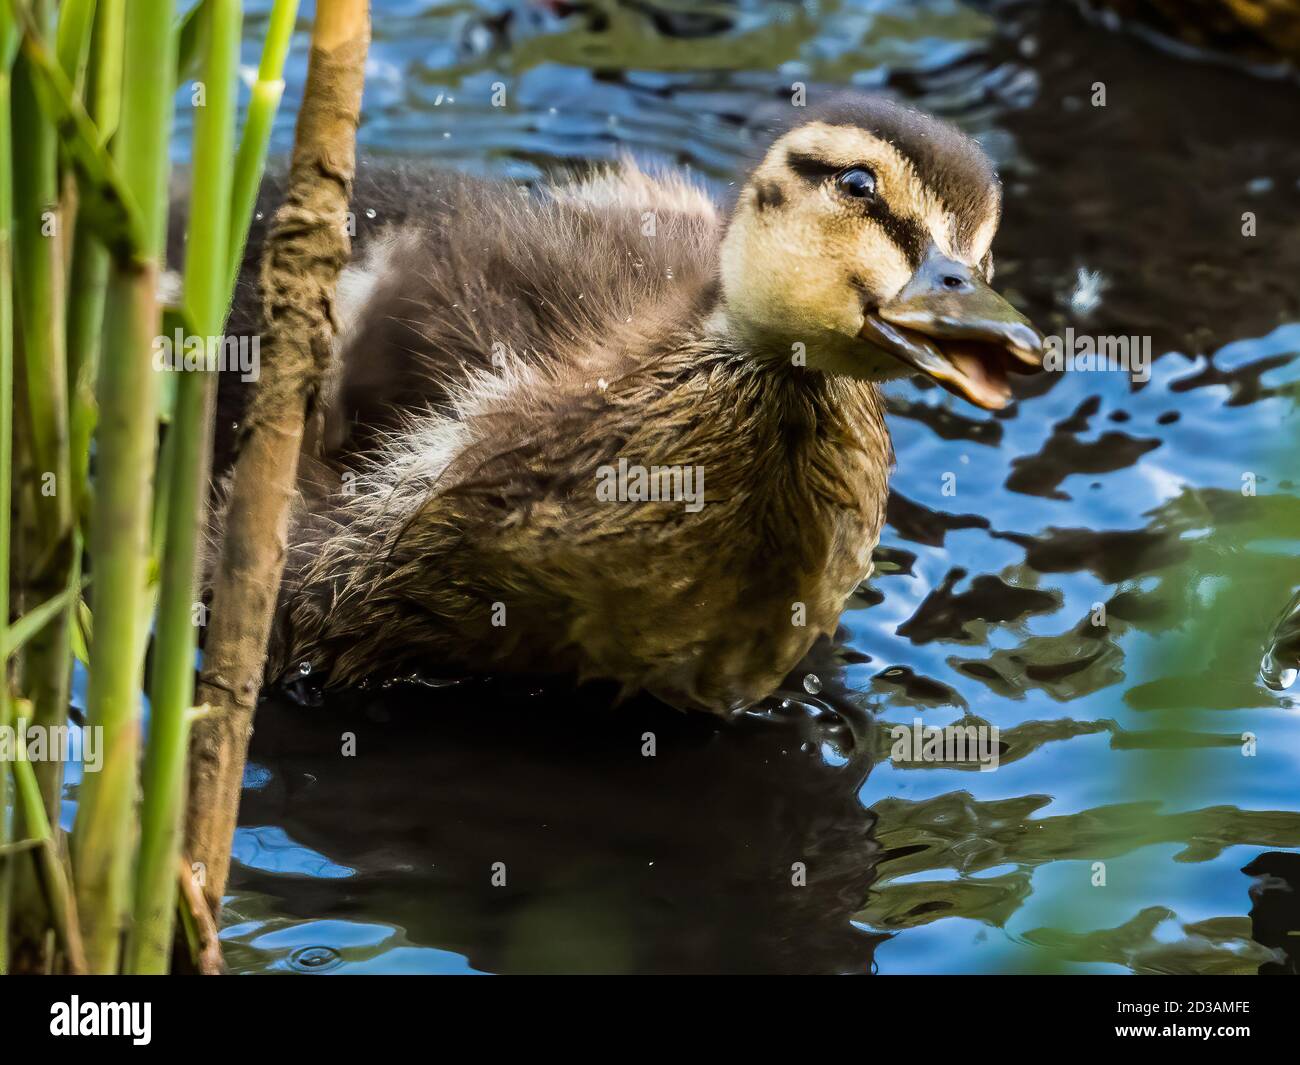 Comical look from a duckling! Stock Photo